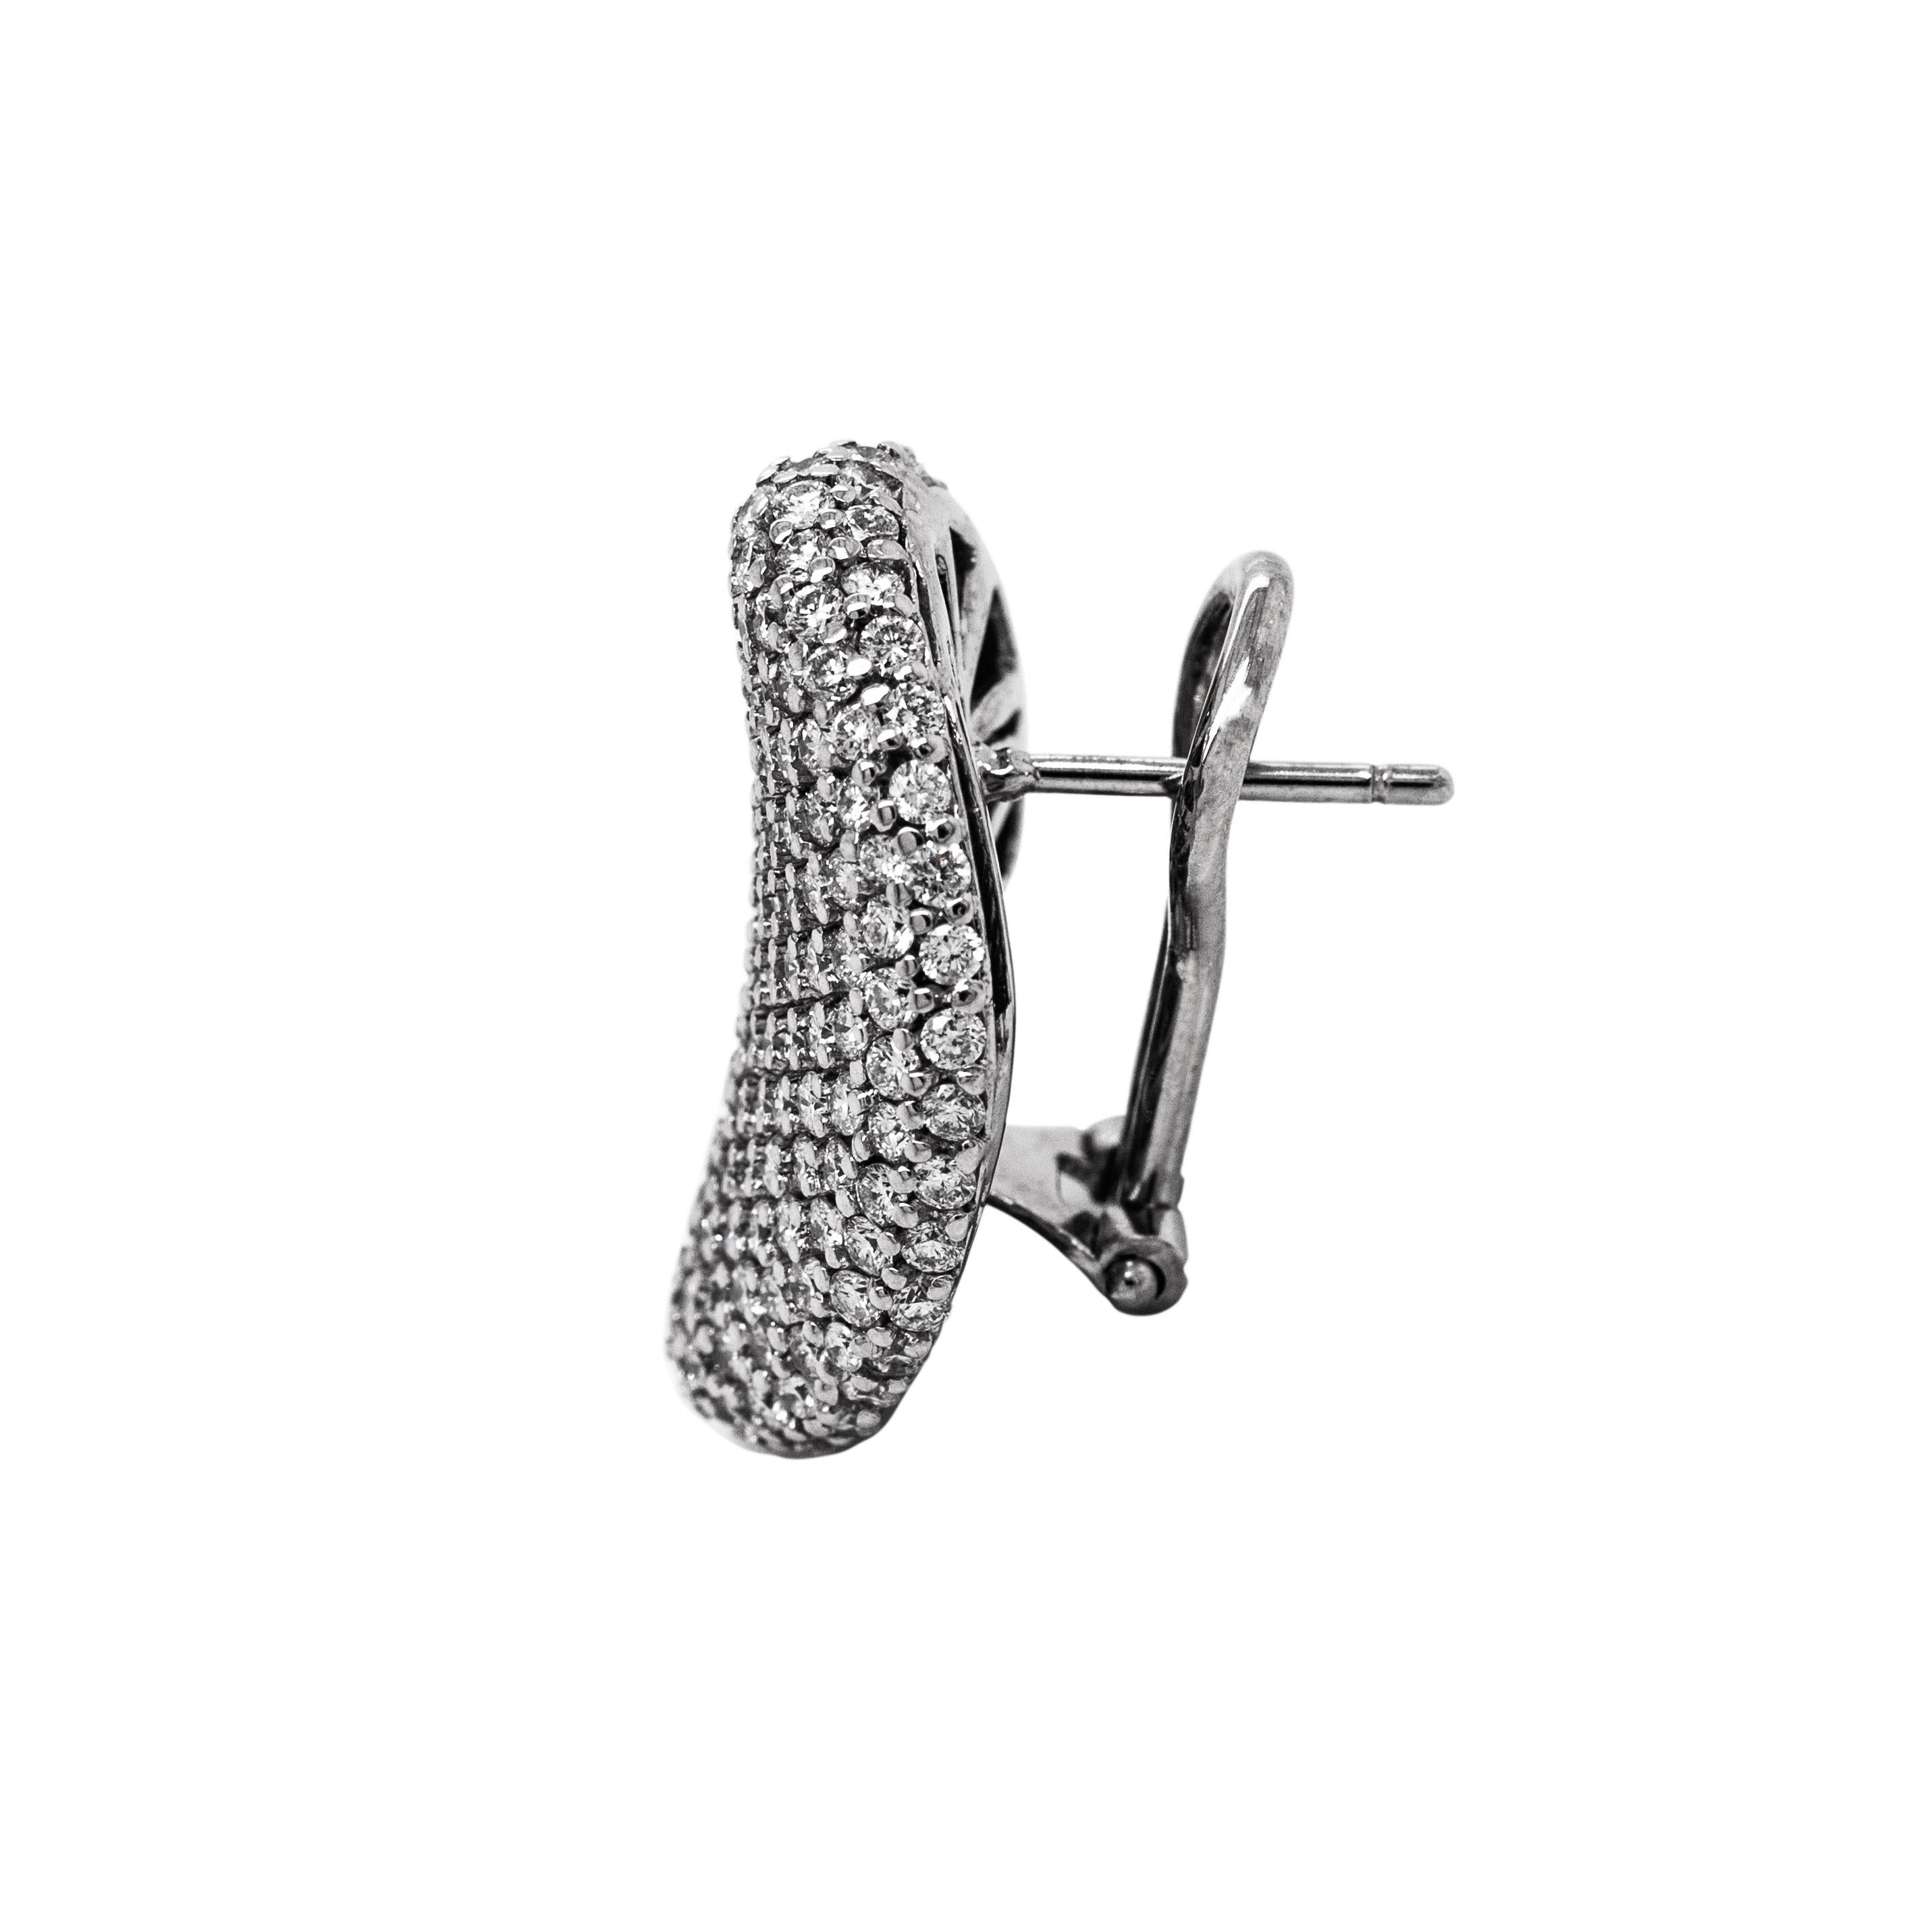 Contemporary 21st Century 18-Karat White Gold set with F/G VVS Diamonds Disk-shaped Earrings For Sale